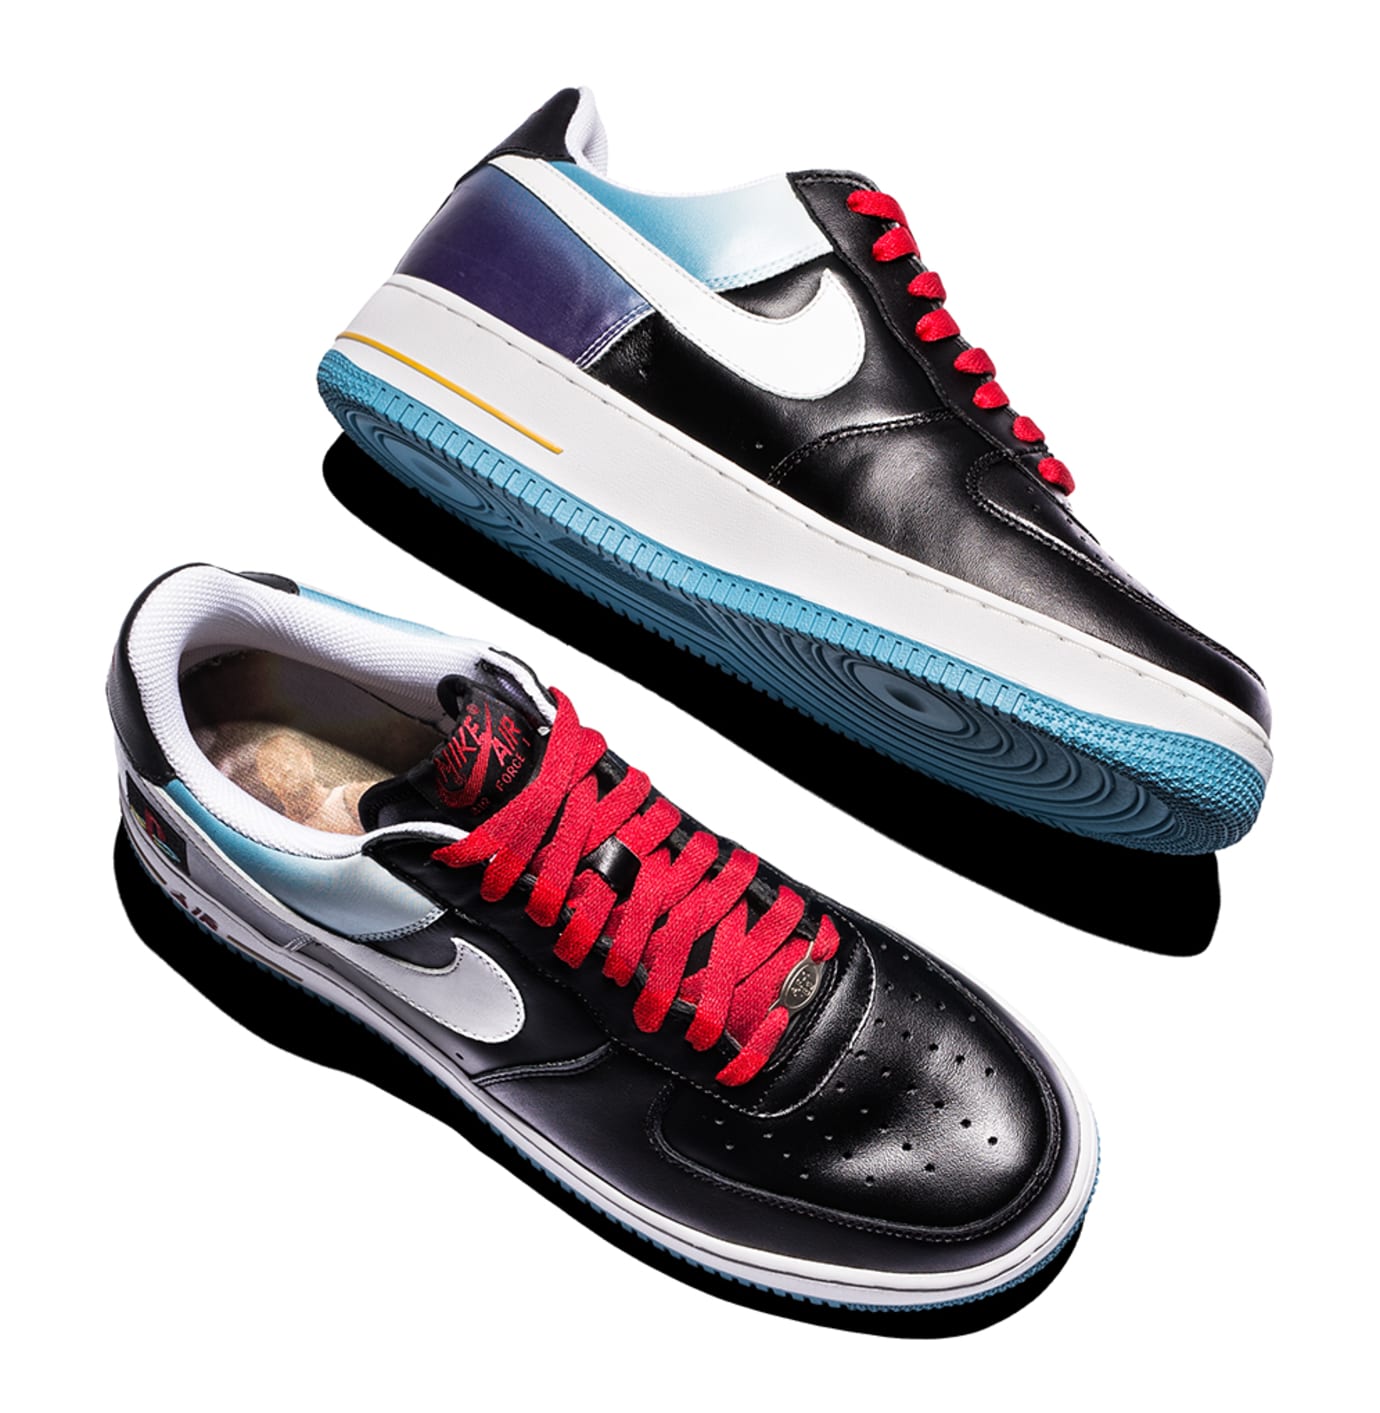 Playstation x Nike Air Force 1 Low (Leather)